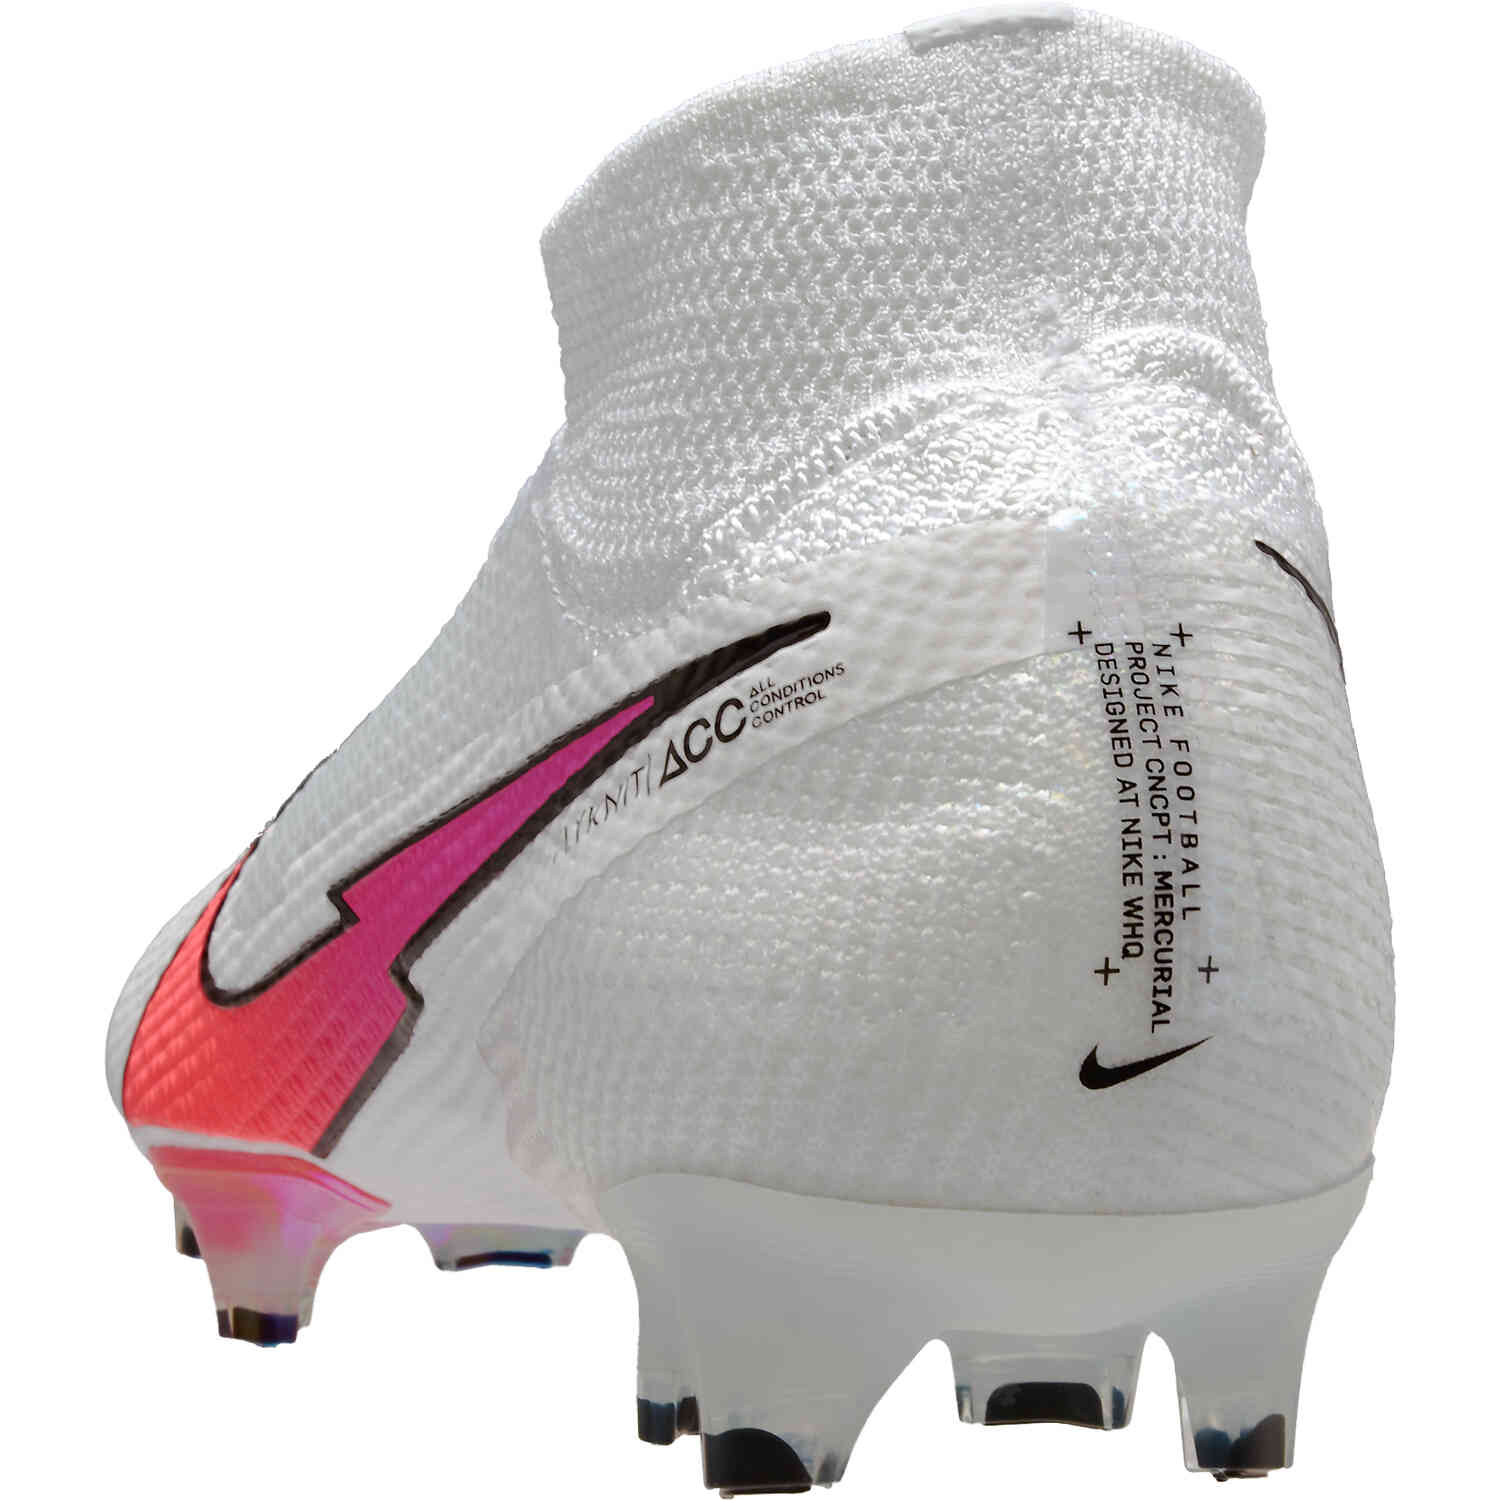 Nike Mercurial Superfly 7 Elite FG Soccer Cleat White Flash